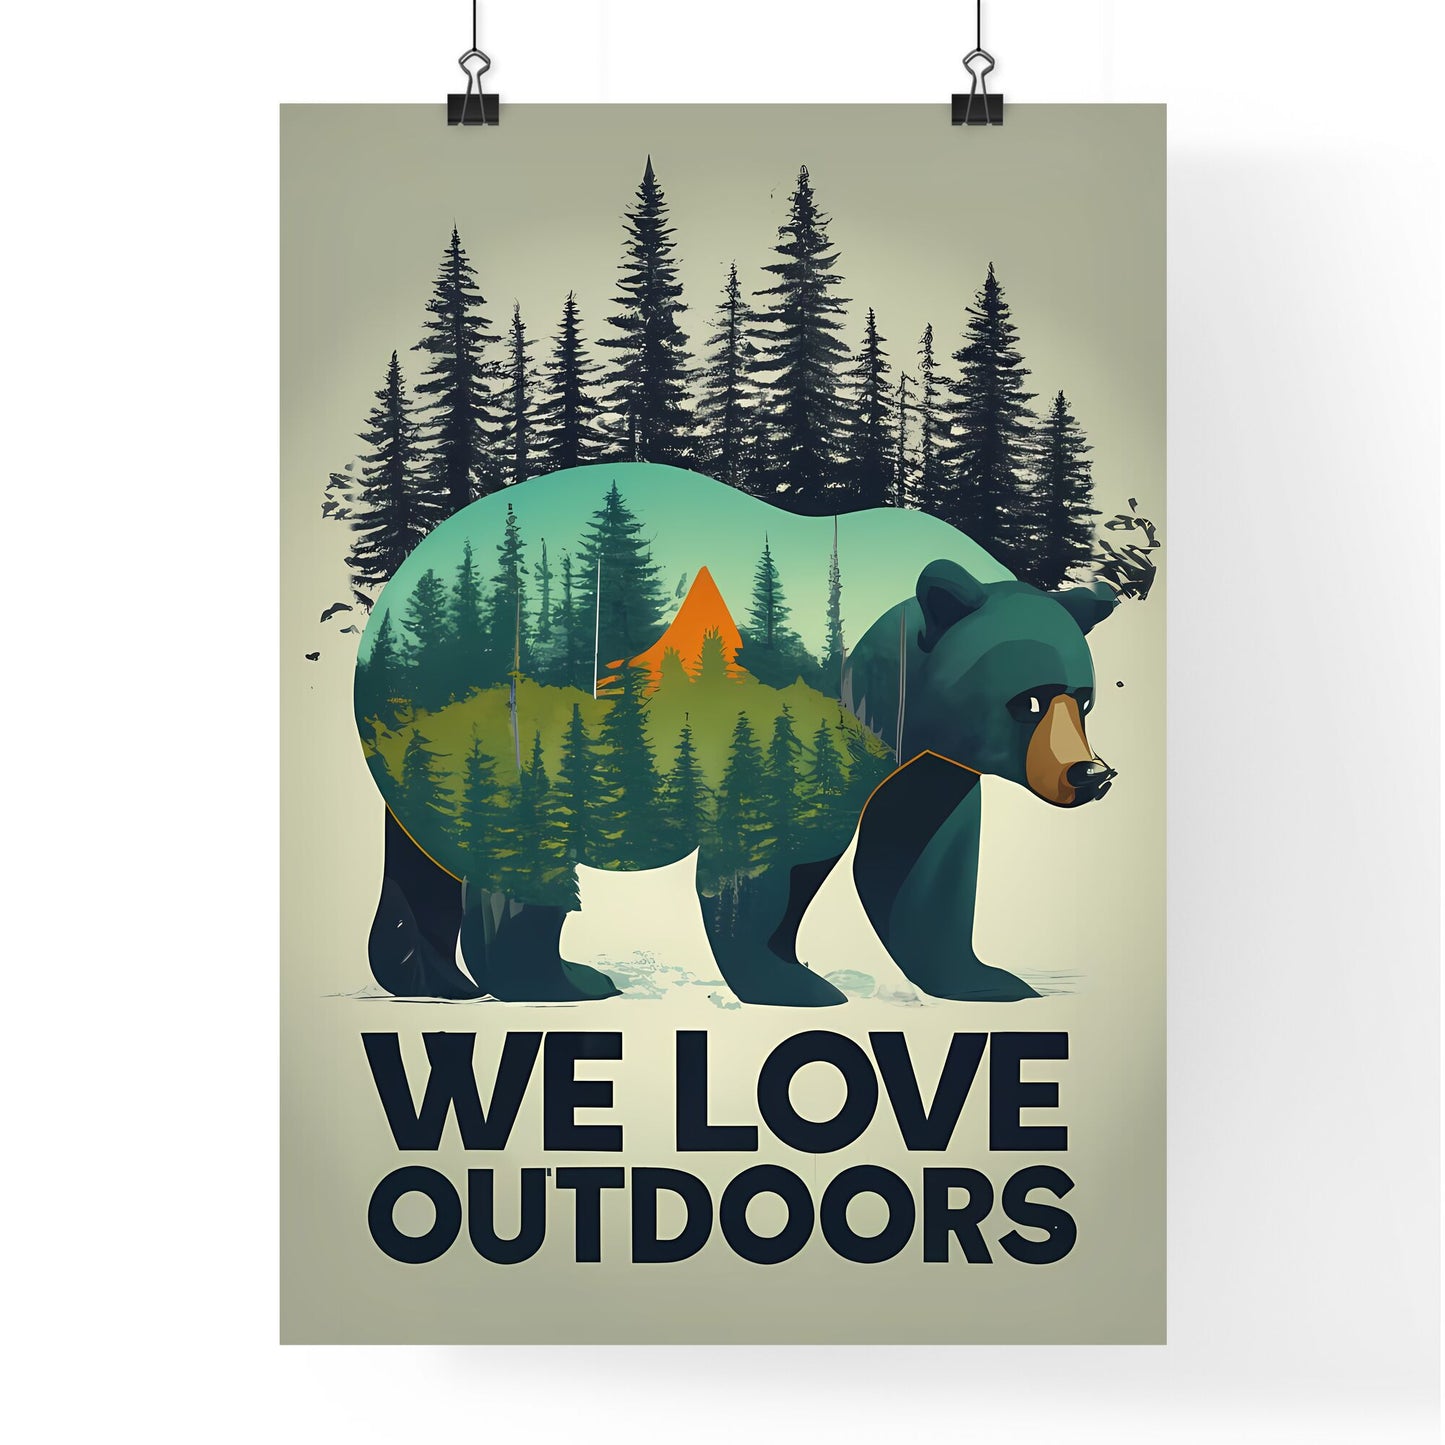 We Love Outdoors - A Bear With Trees And A Mountain Art Print Default Title